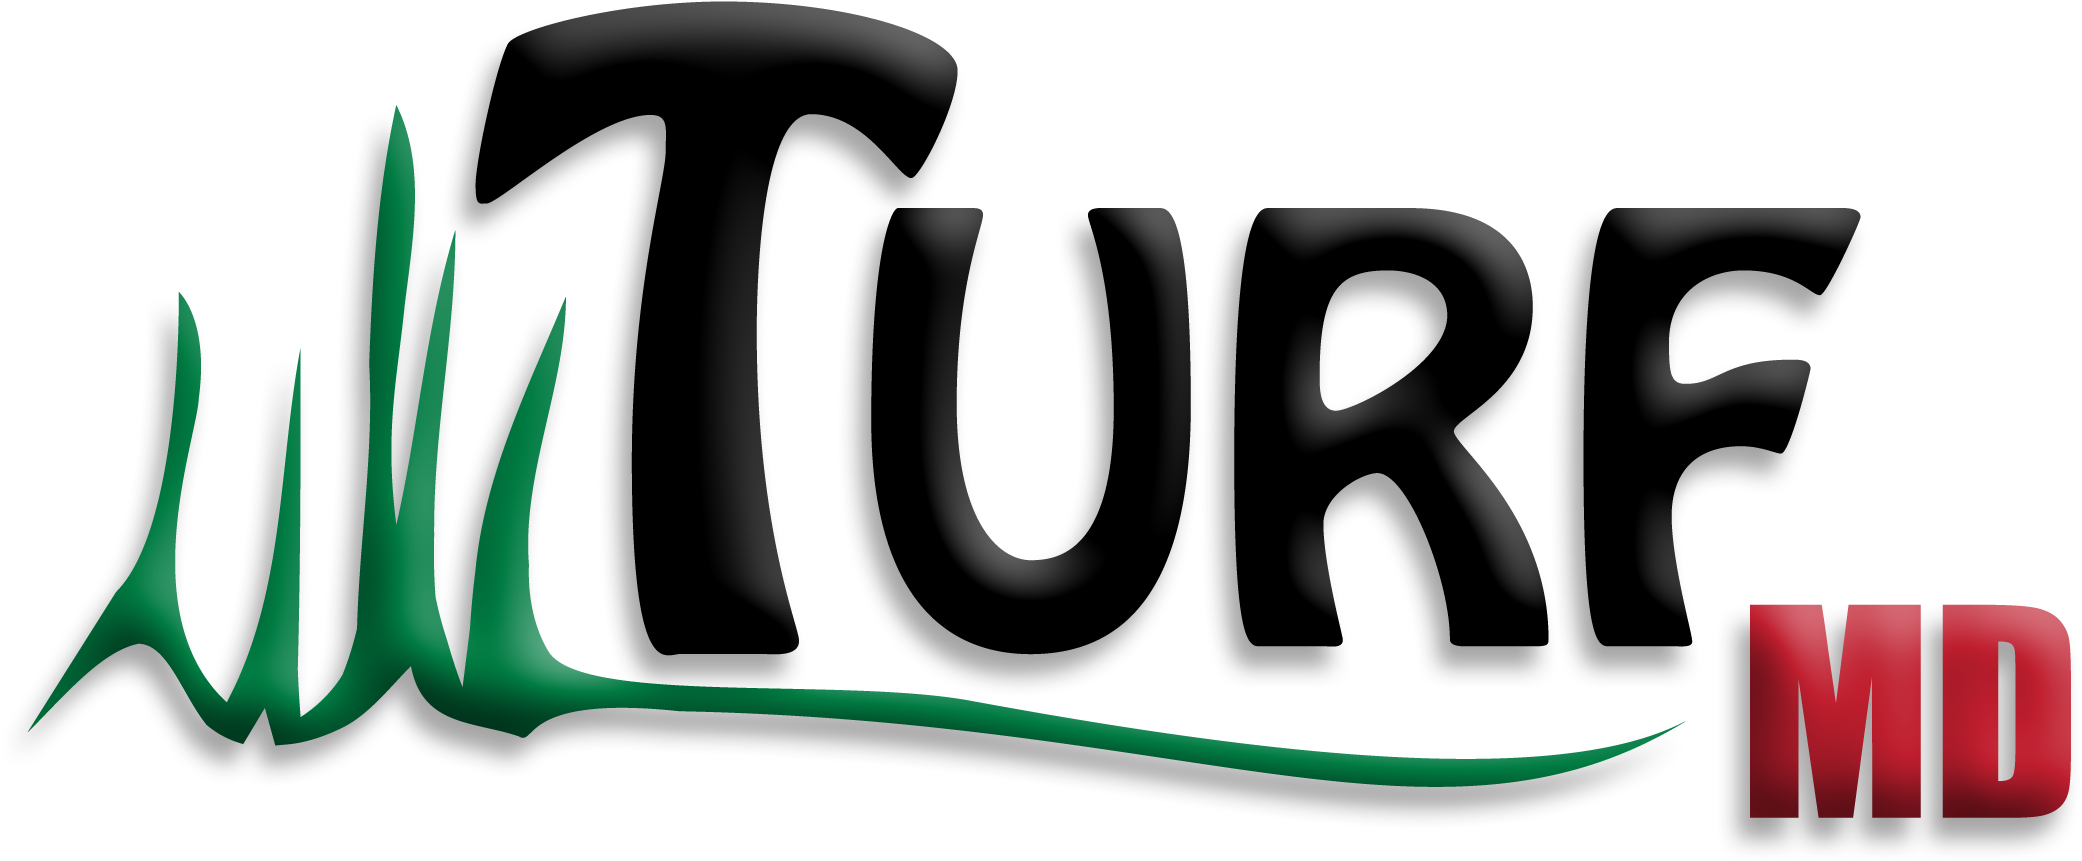 Turf MD, Inc. | Lawn Care Services - Landscaping - Soil Testing - Tick Control